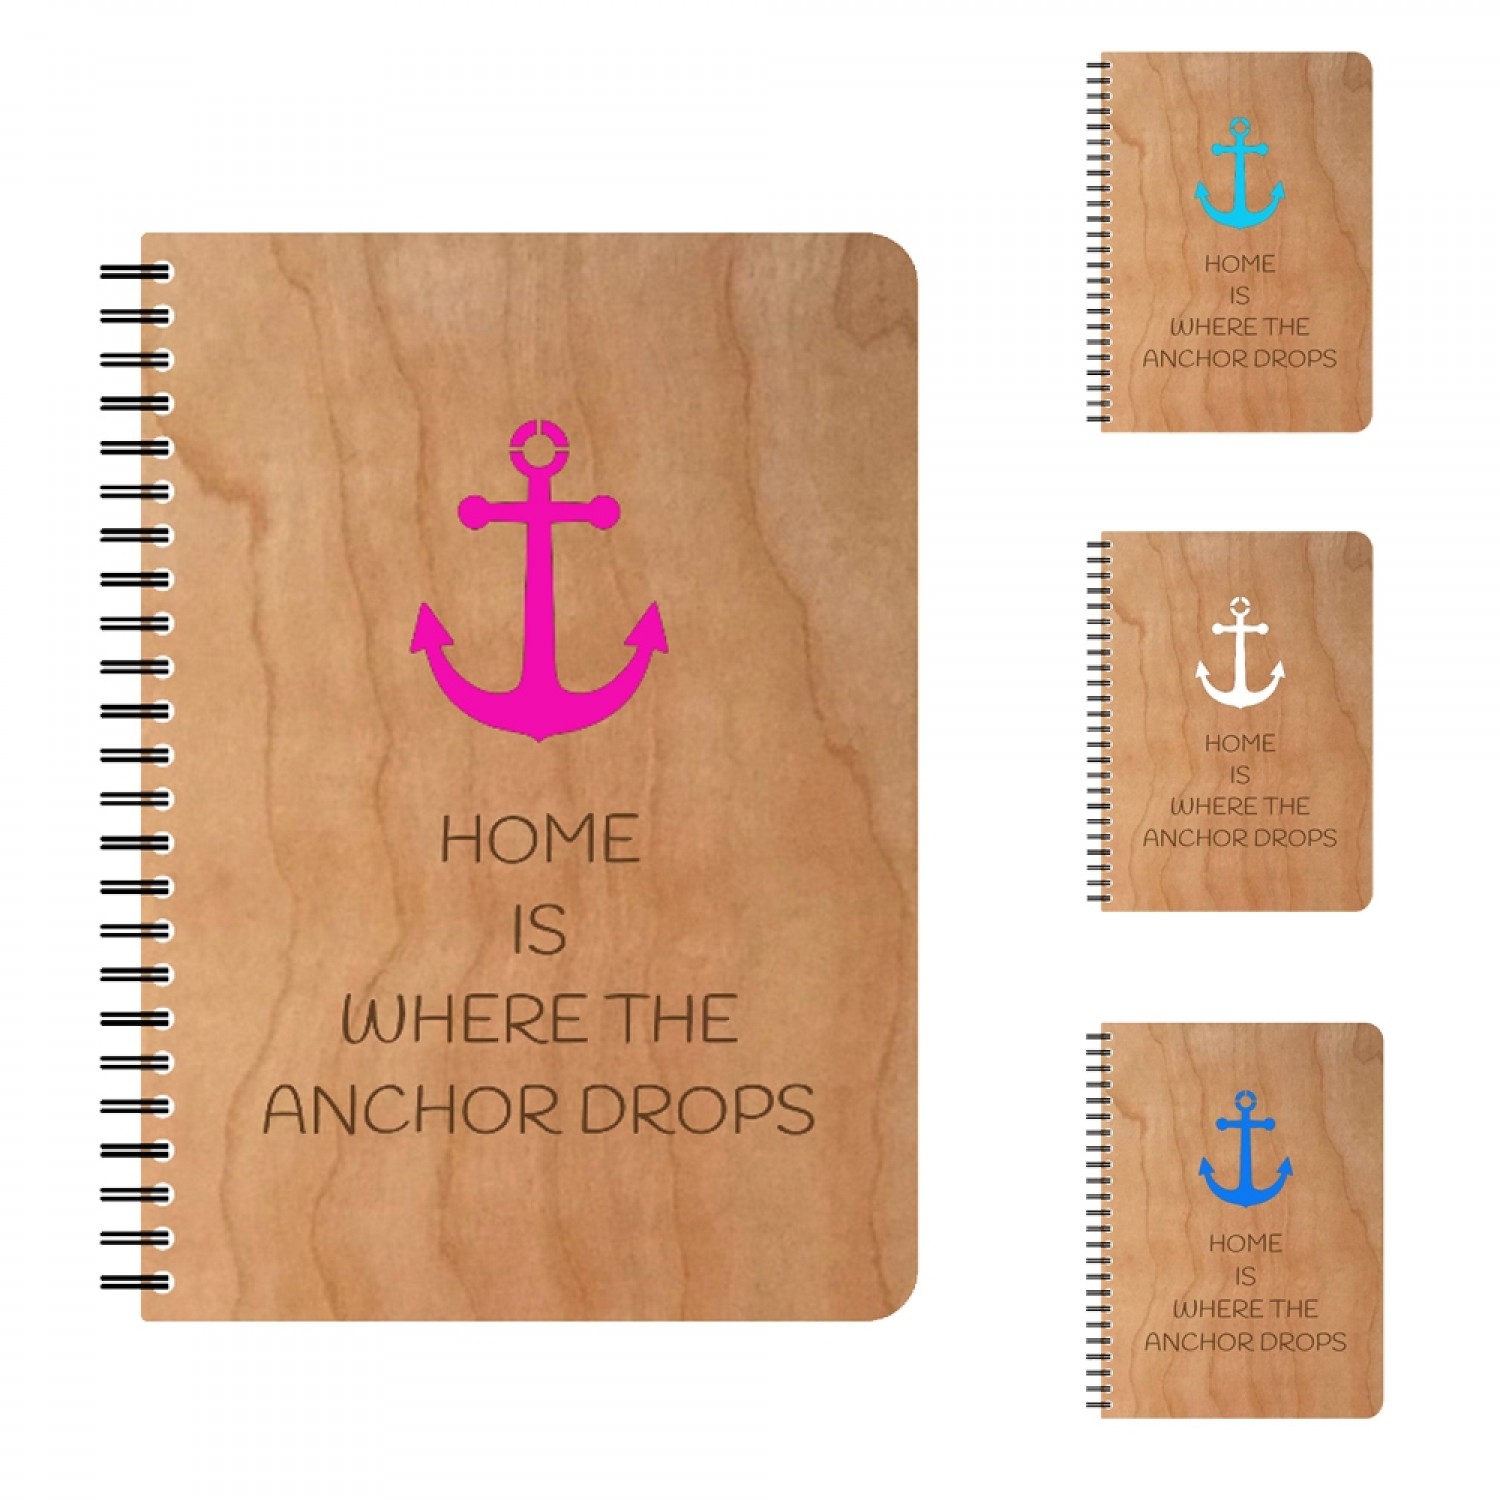 ANCHOR eco notebook in cherrywood cover | echtholz